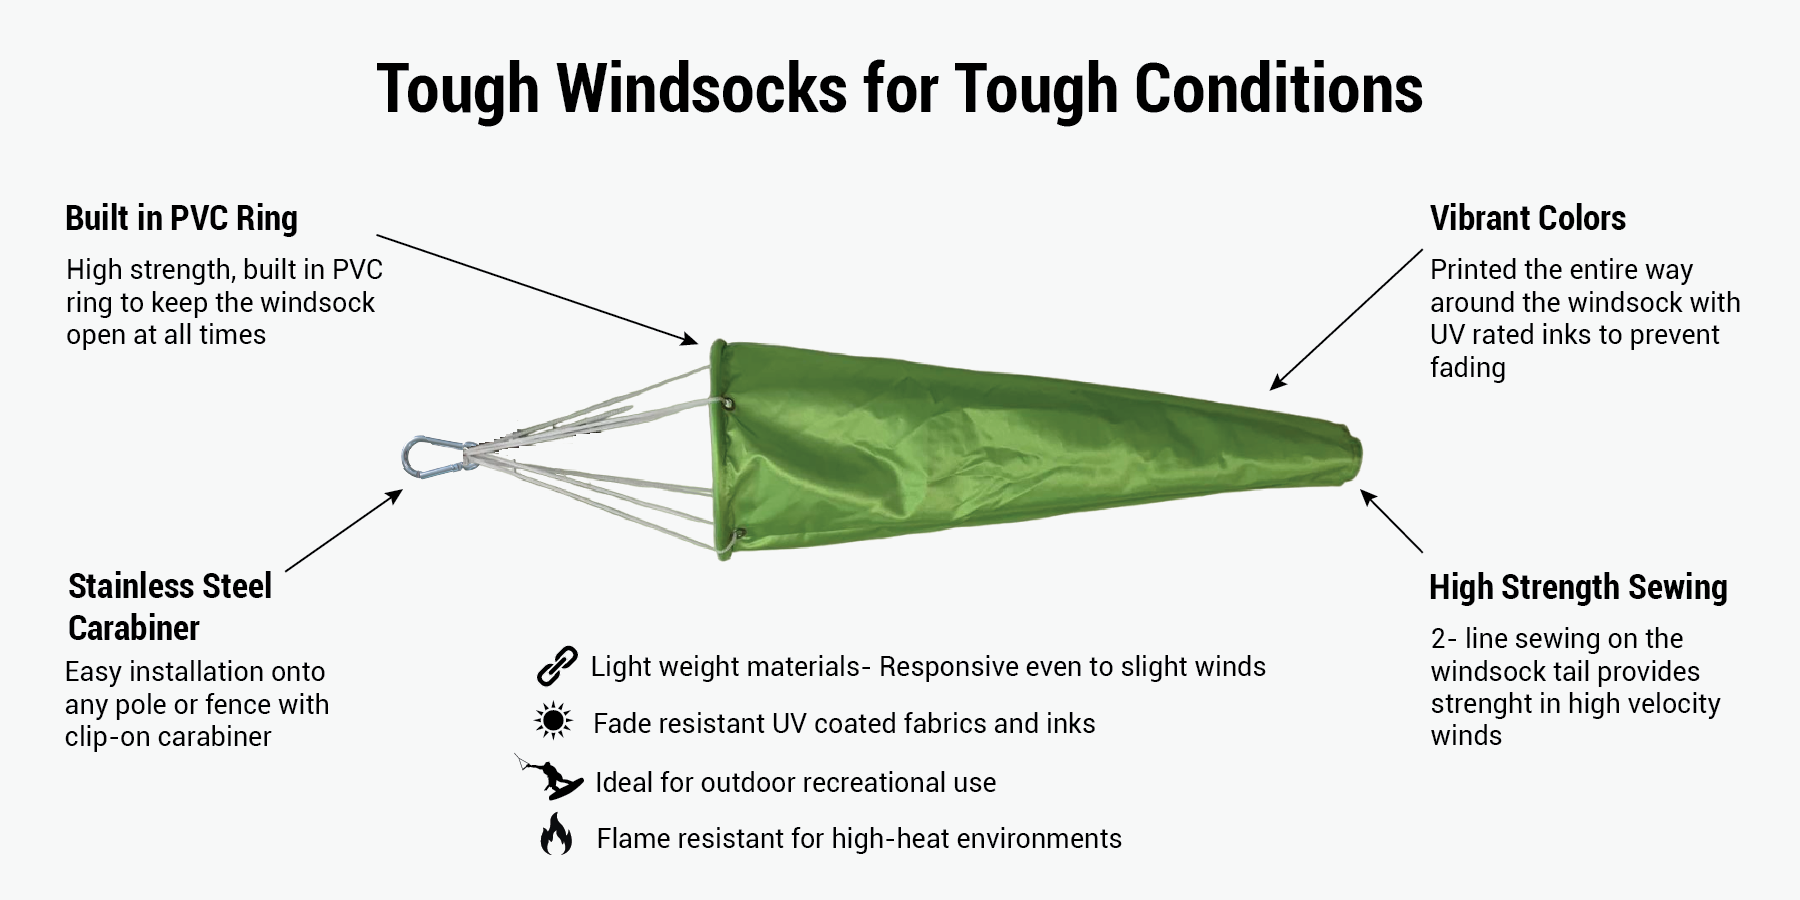 Bech warning flag windsock. Lightweight and highly responsive infographic